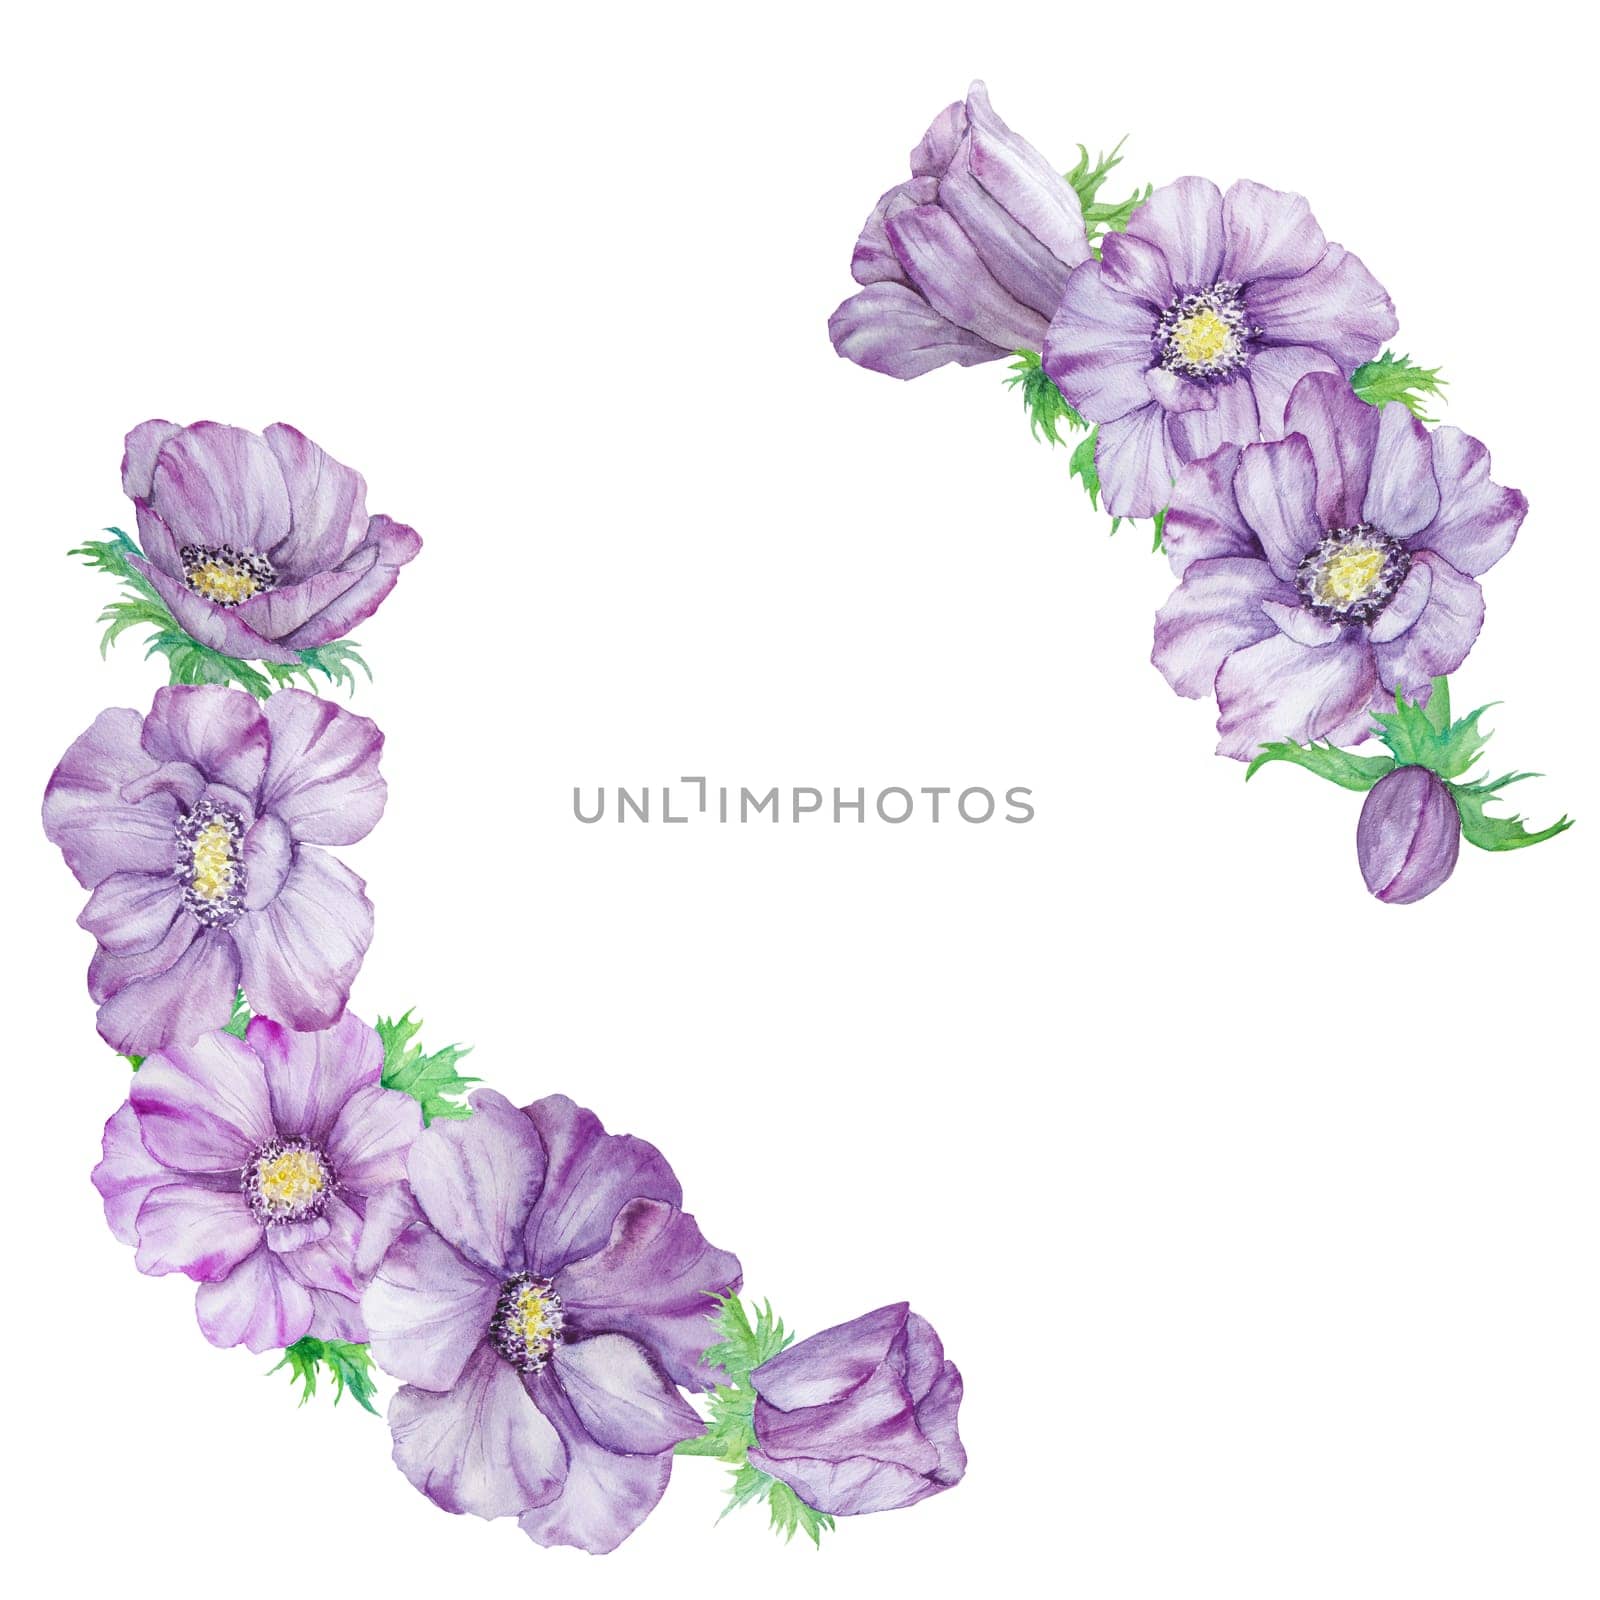 Watercolor hand drawn wreath of purple anemones with green leaves isolated on white background. by florainlove_art